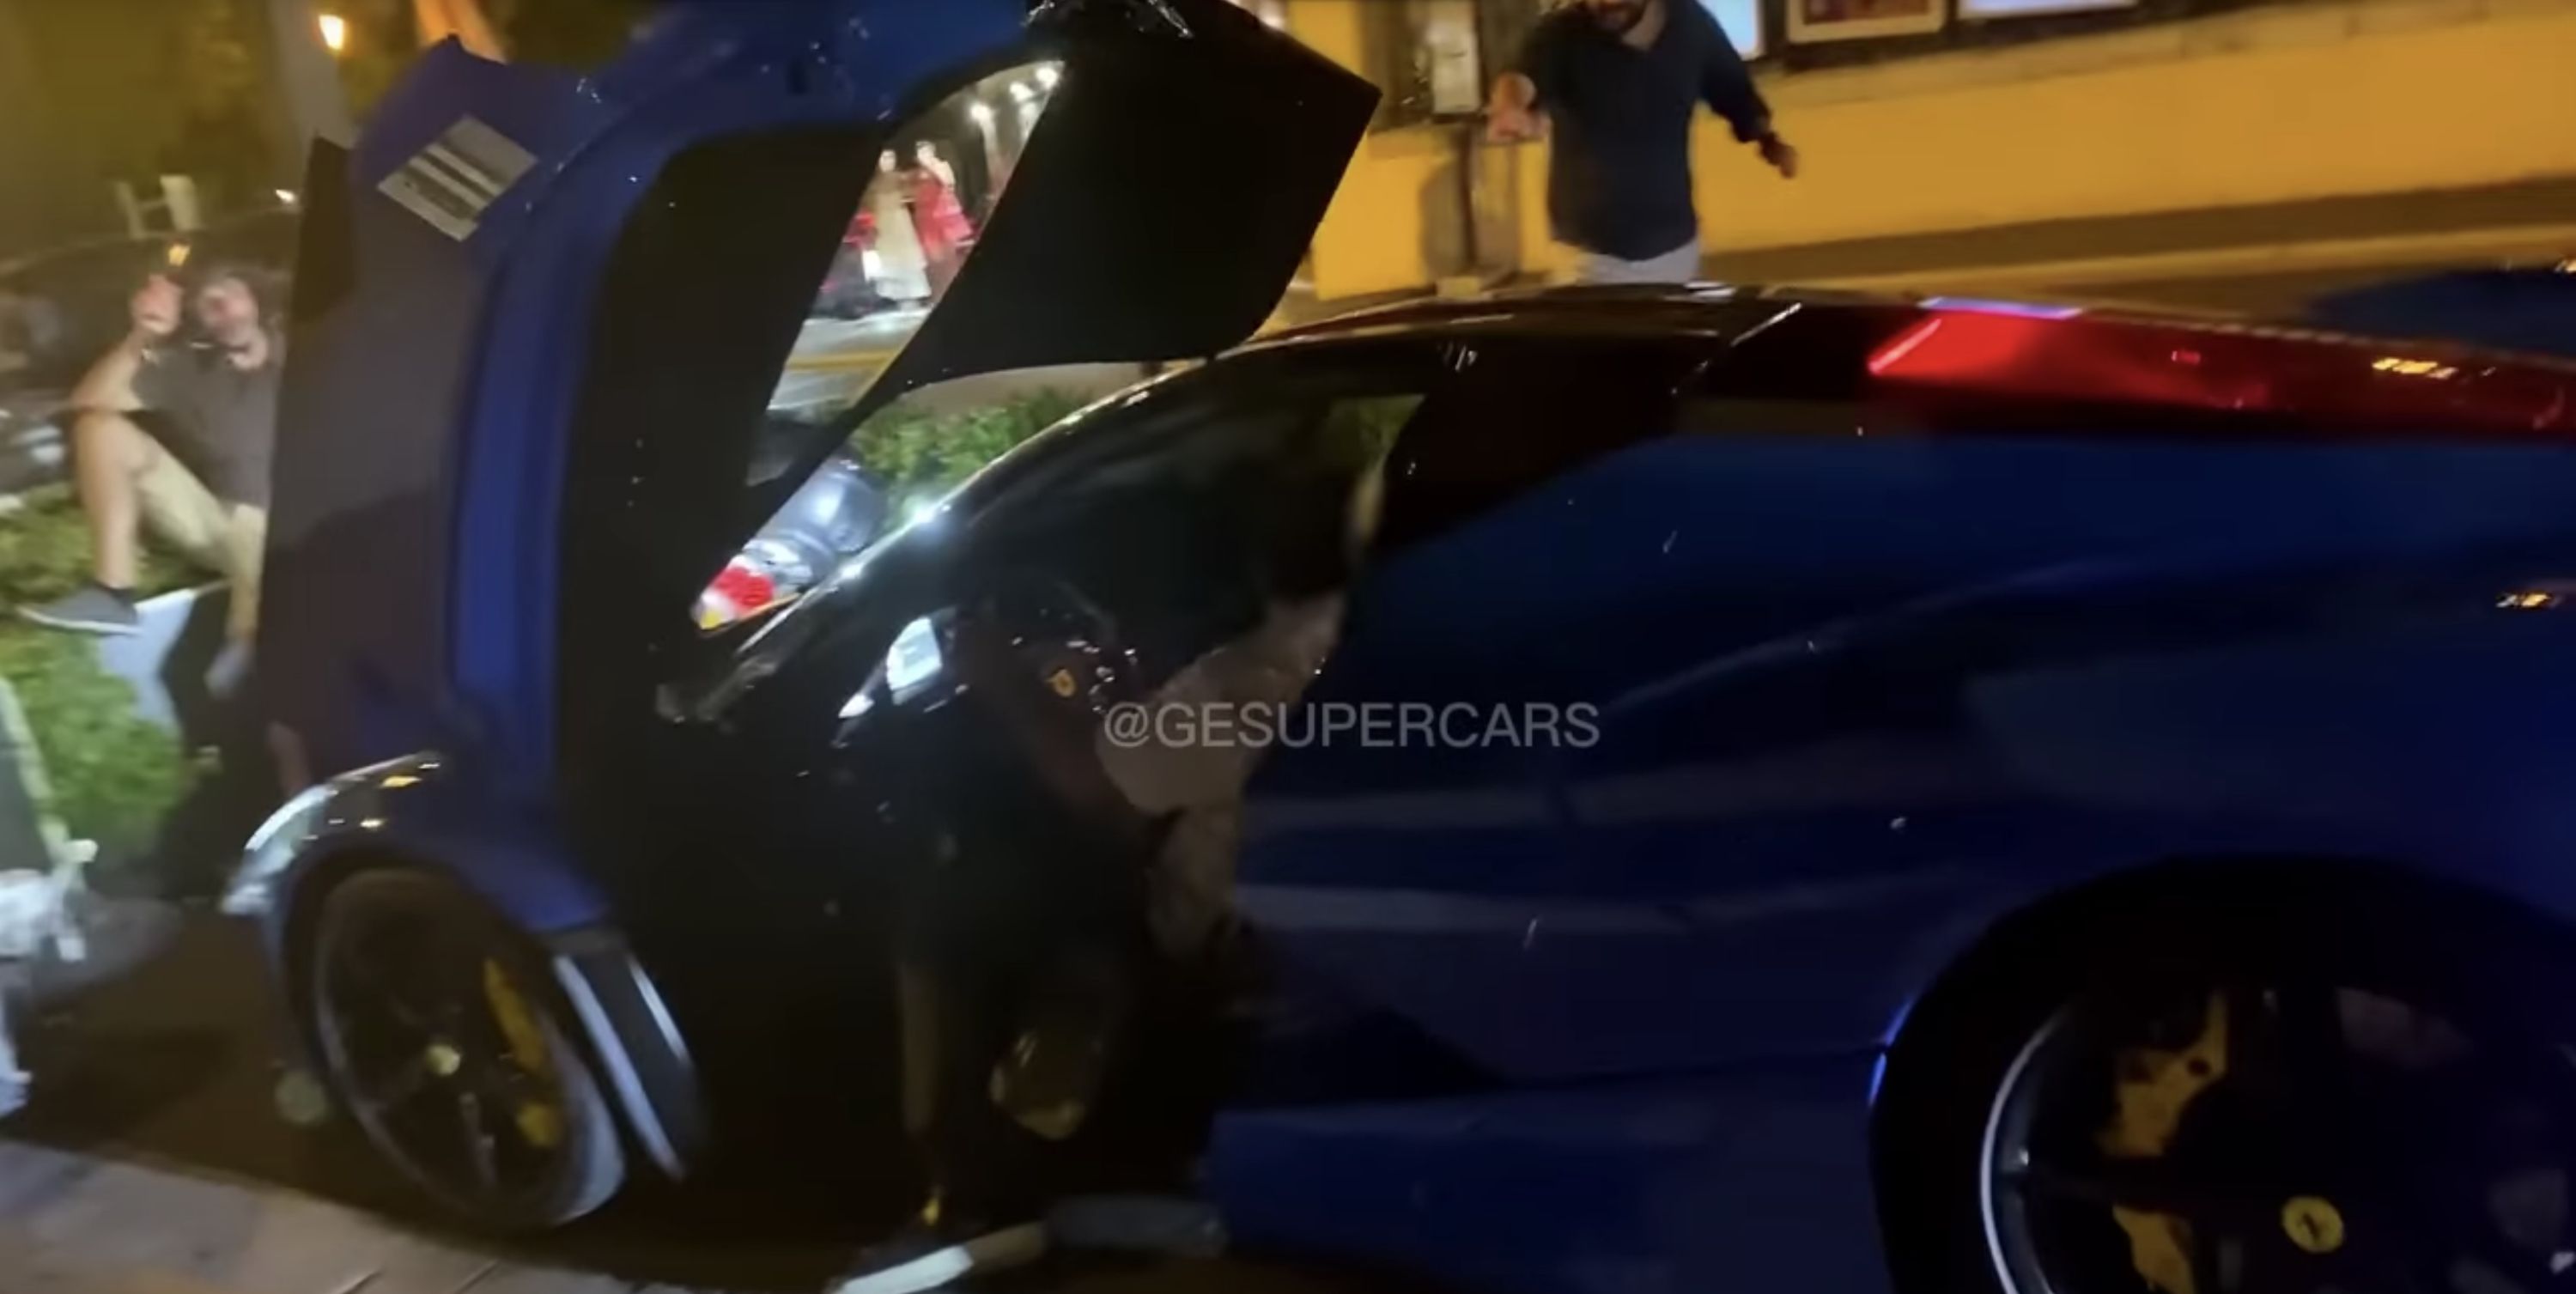 Watch A Valet Smash a LaFerrari Into Some Scooters